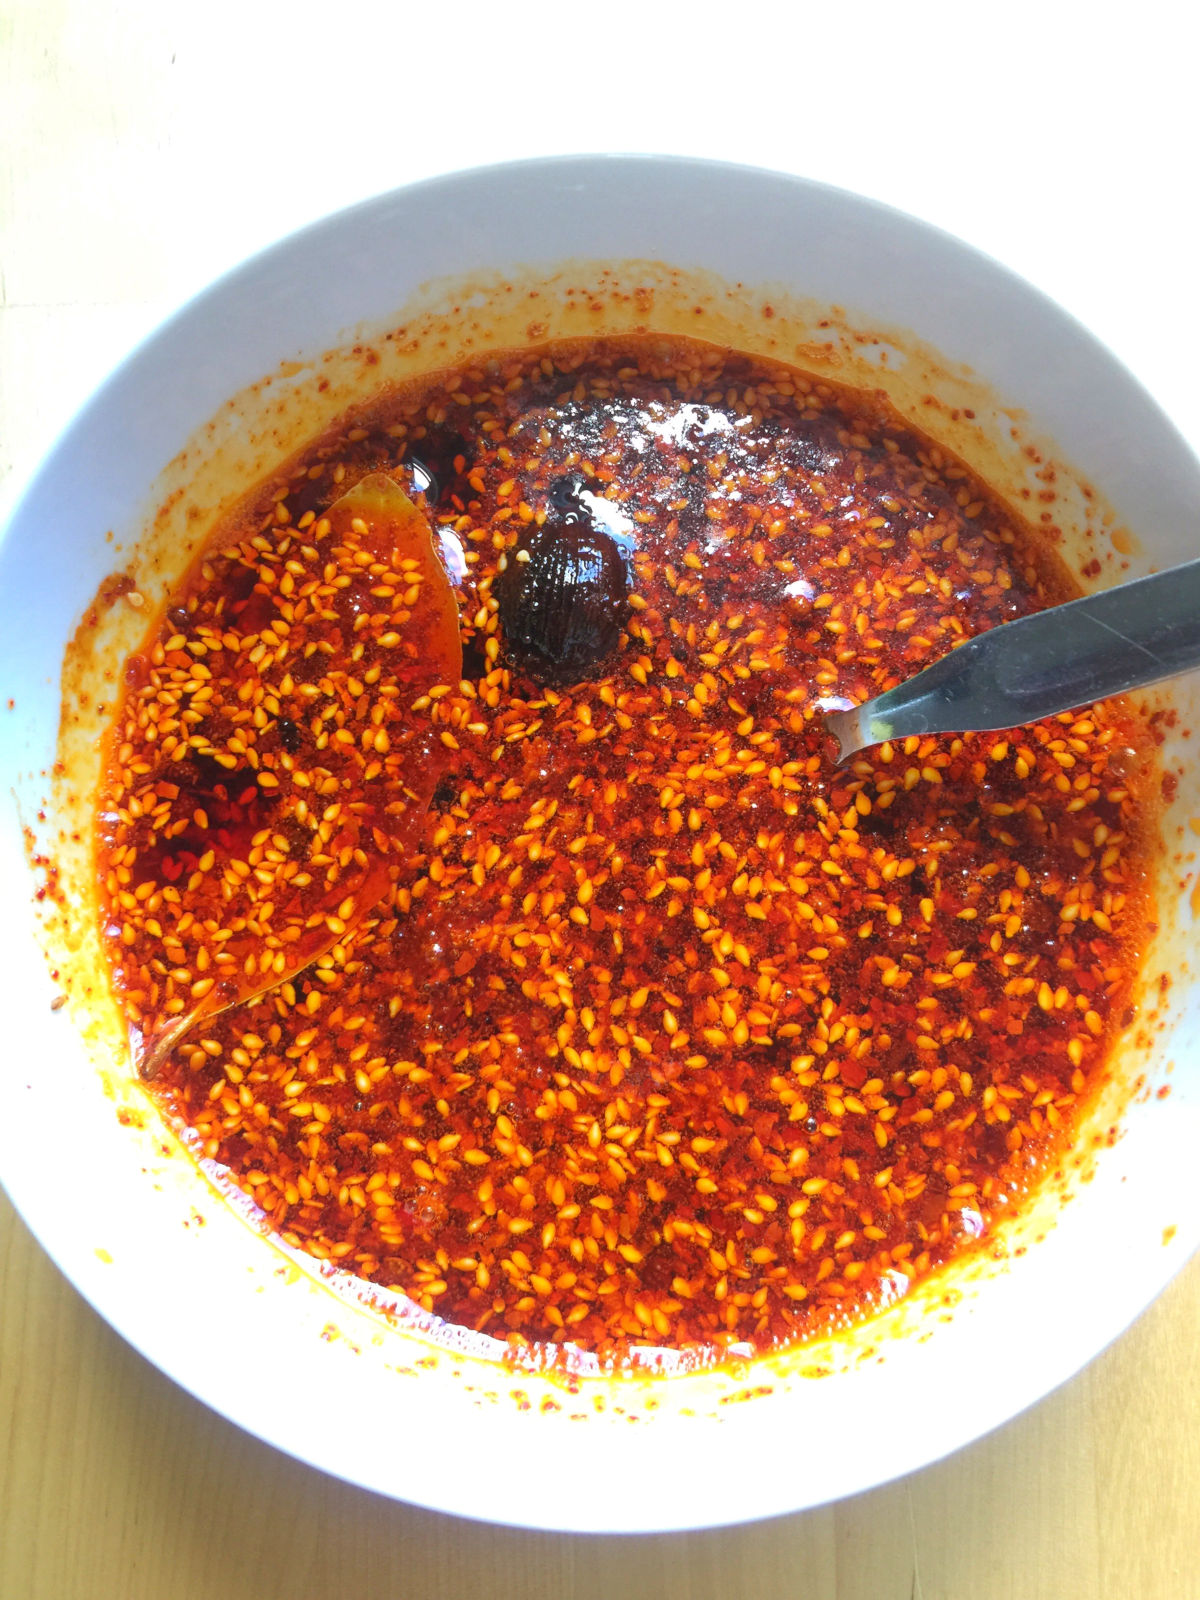 Overhead view of homemade chili oil in a white bowl with a spoon in the bowl.